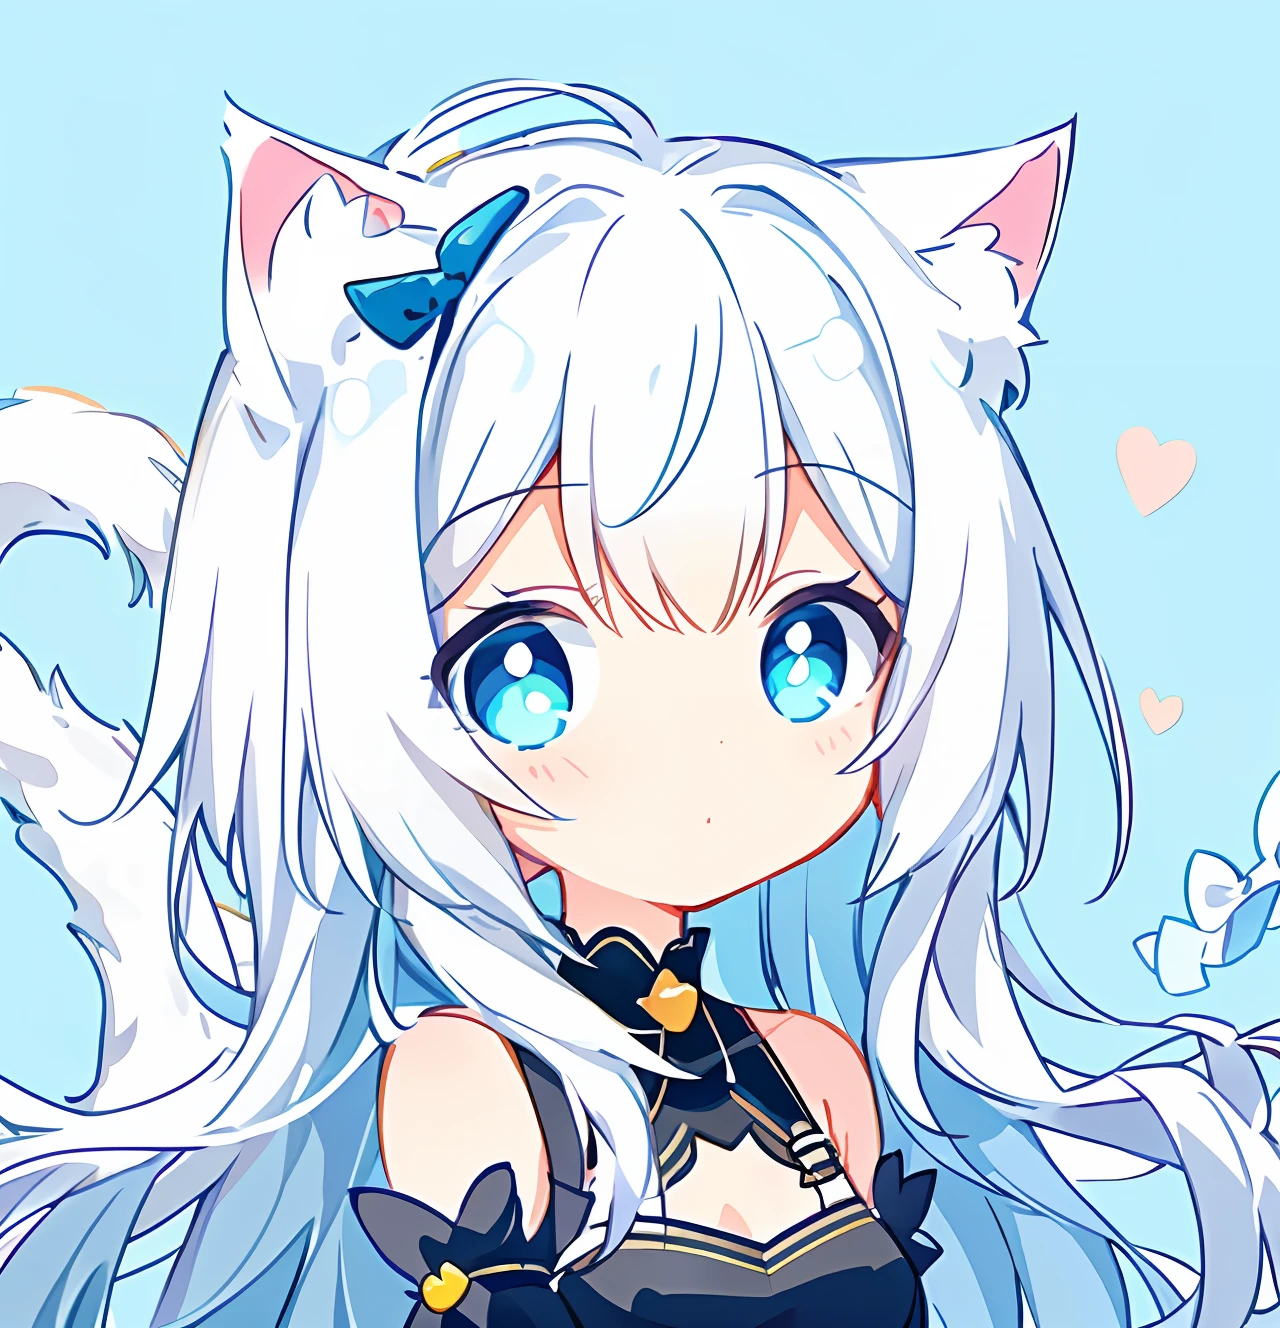 Draw a girl with a cat's tail and a dress, cute anime catgirl, Cat woman, anime catgirl, Cute!! tchibi!!! Cat woman, Cat girl, thick lineart, nekomimi, White Cat Girl, DDLC, small curvaceous , linear art, Simple lines of art, flat anime style shading, holding a pudica pose